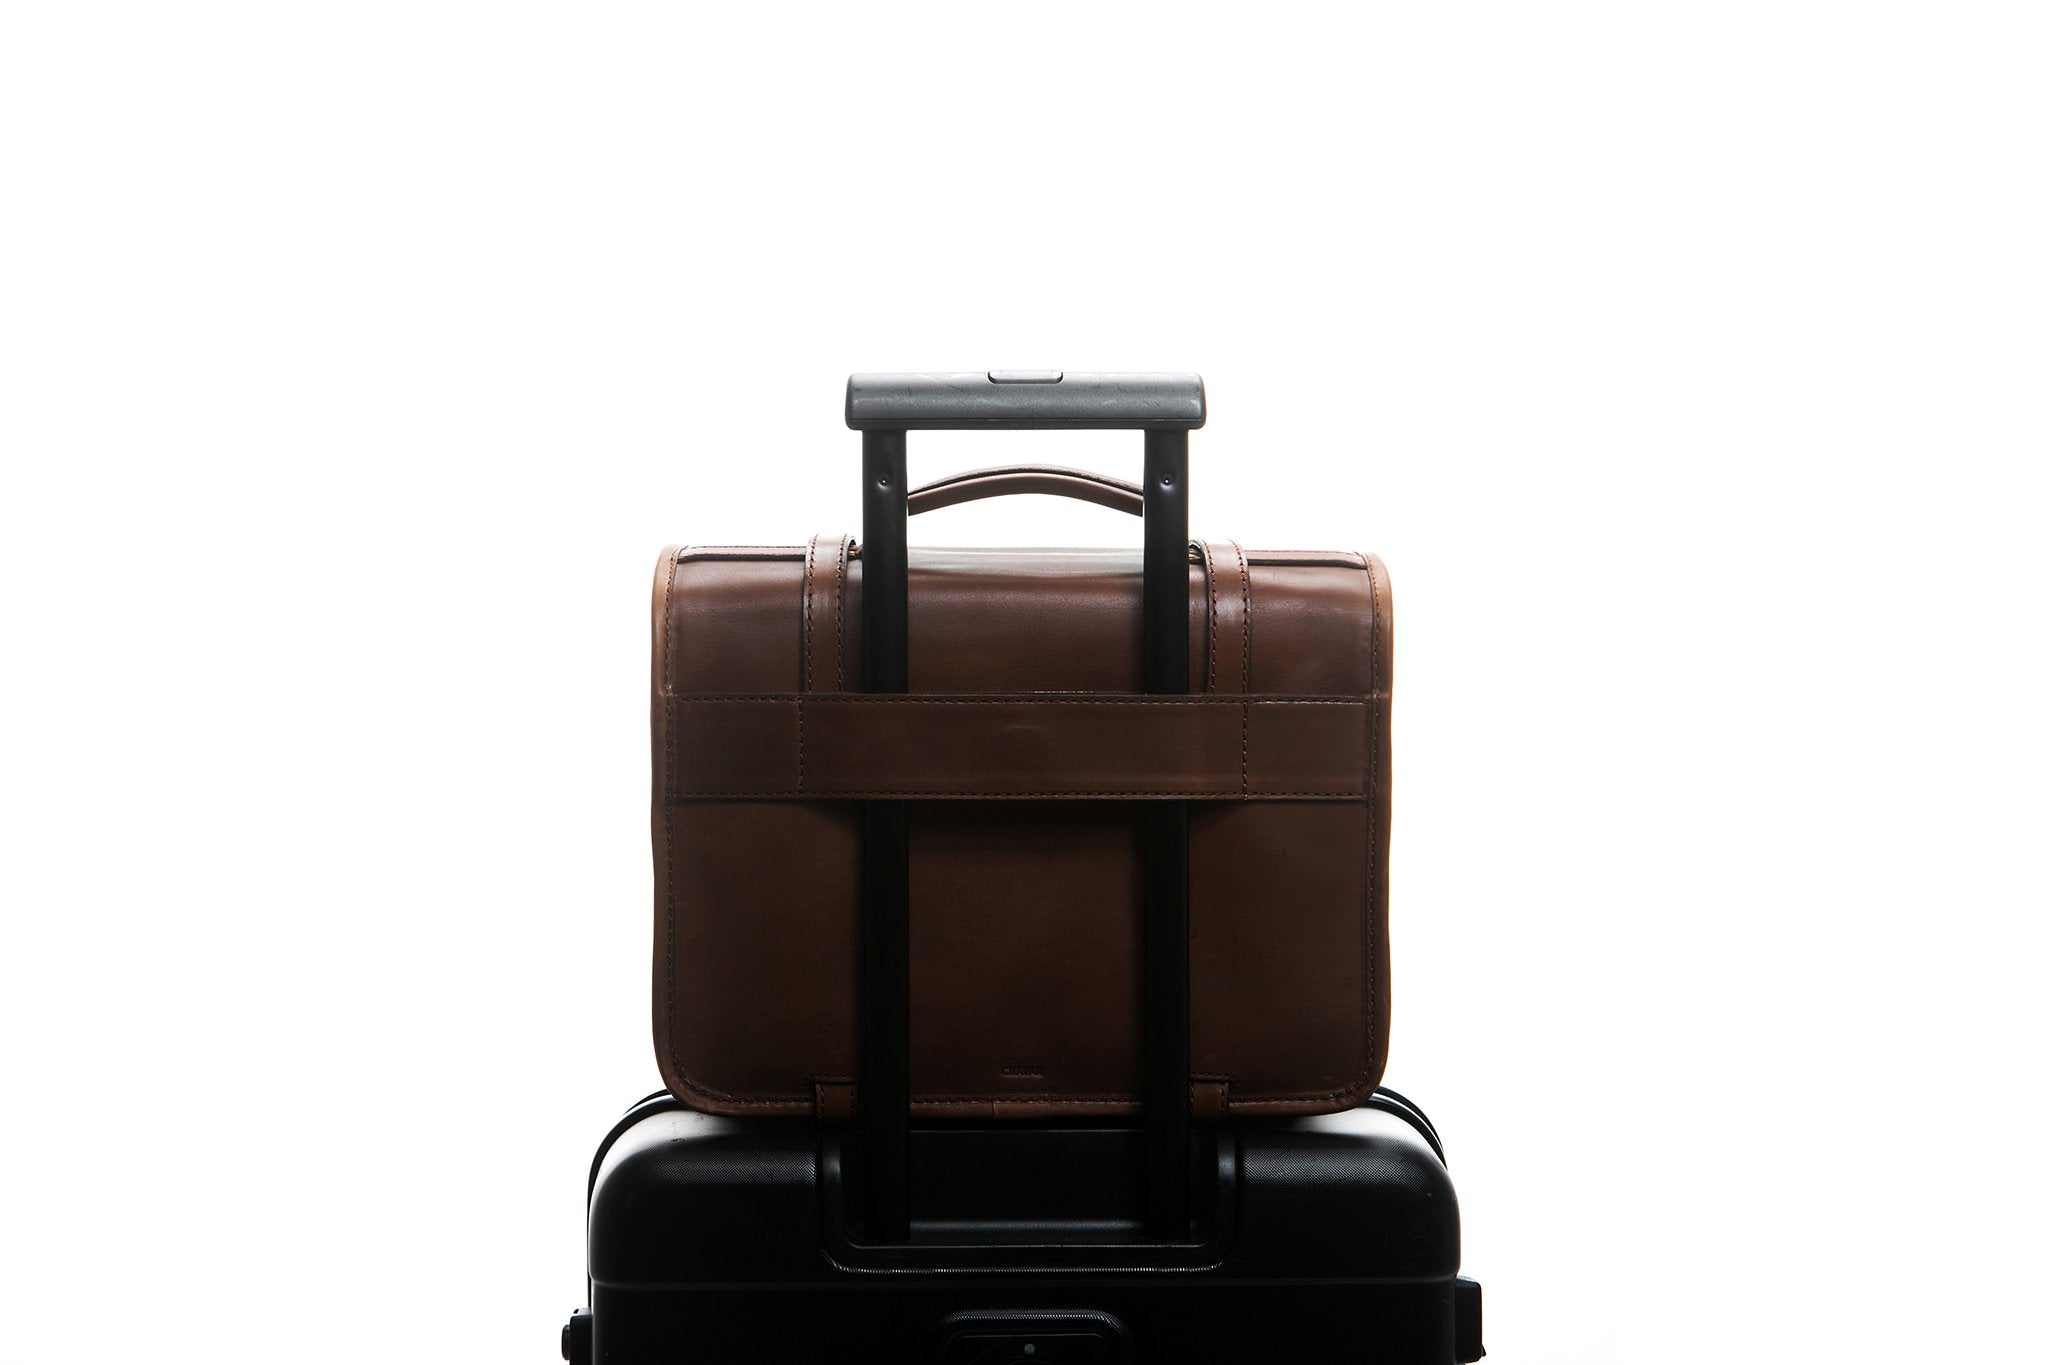 Traveling made easy with a Cravar bag. Function shown here with an all leather older Rana model.